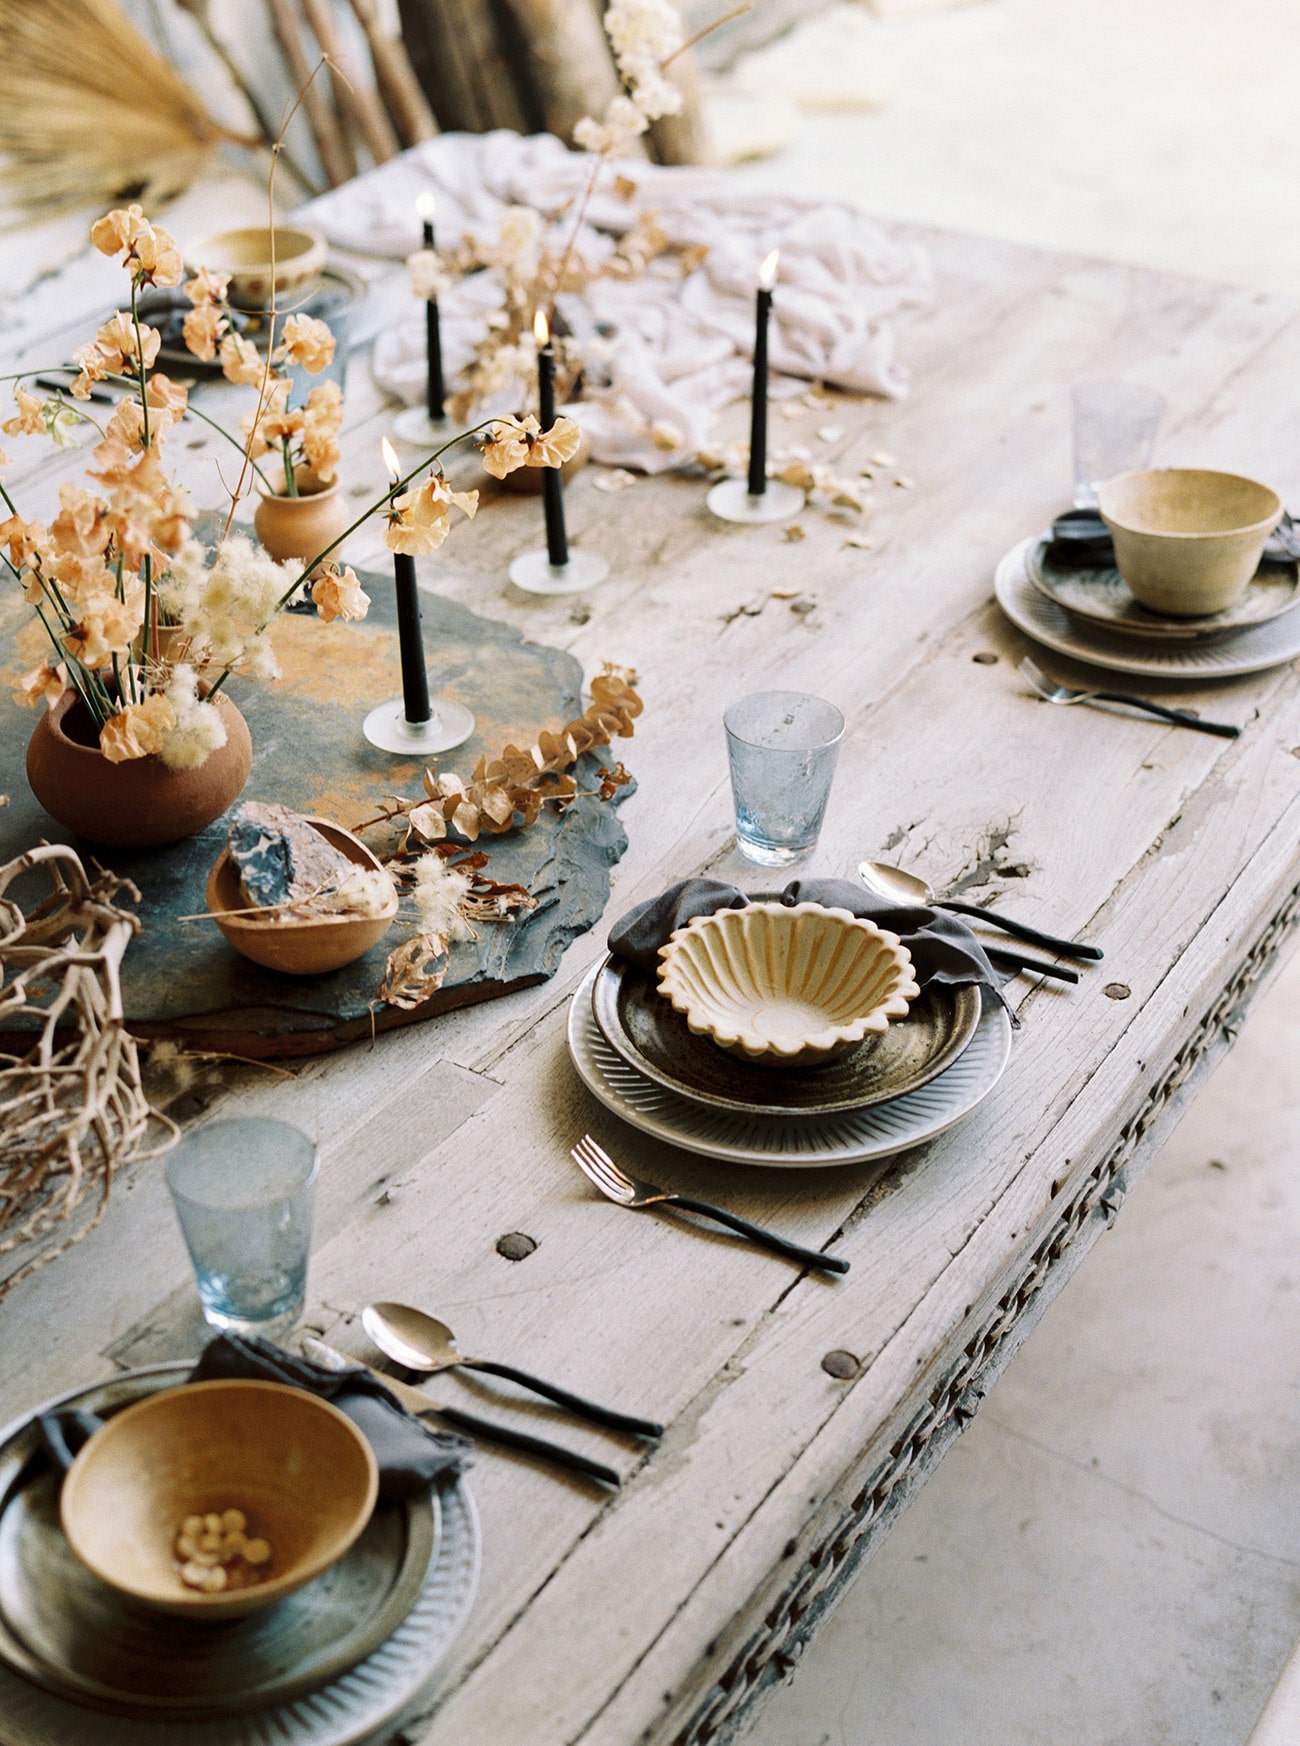 wabi sabi tabletop with earth tones and pottery | inspiring thanksgiving tabletop settings coco kelley